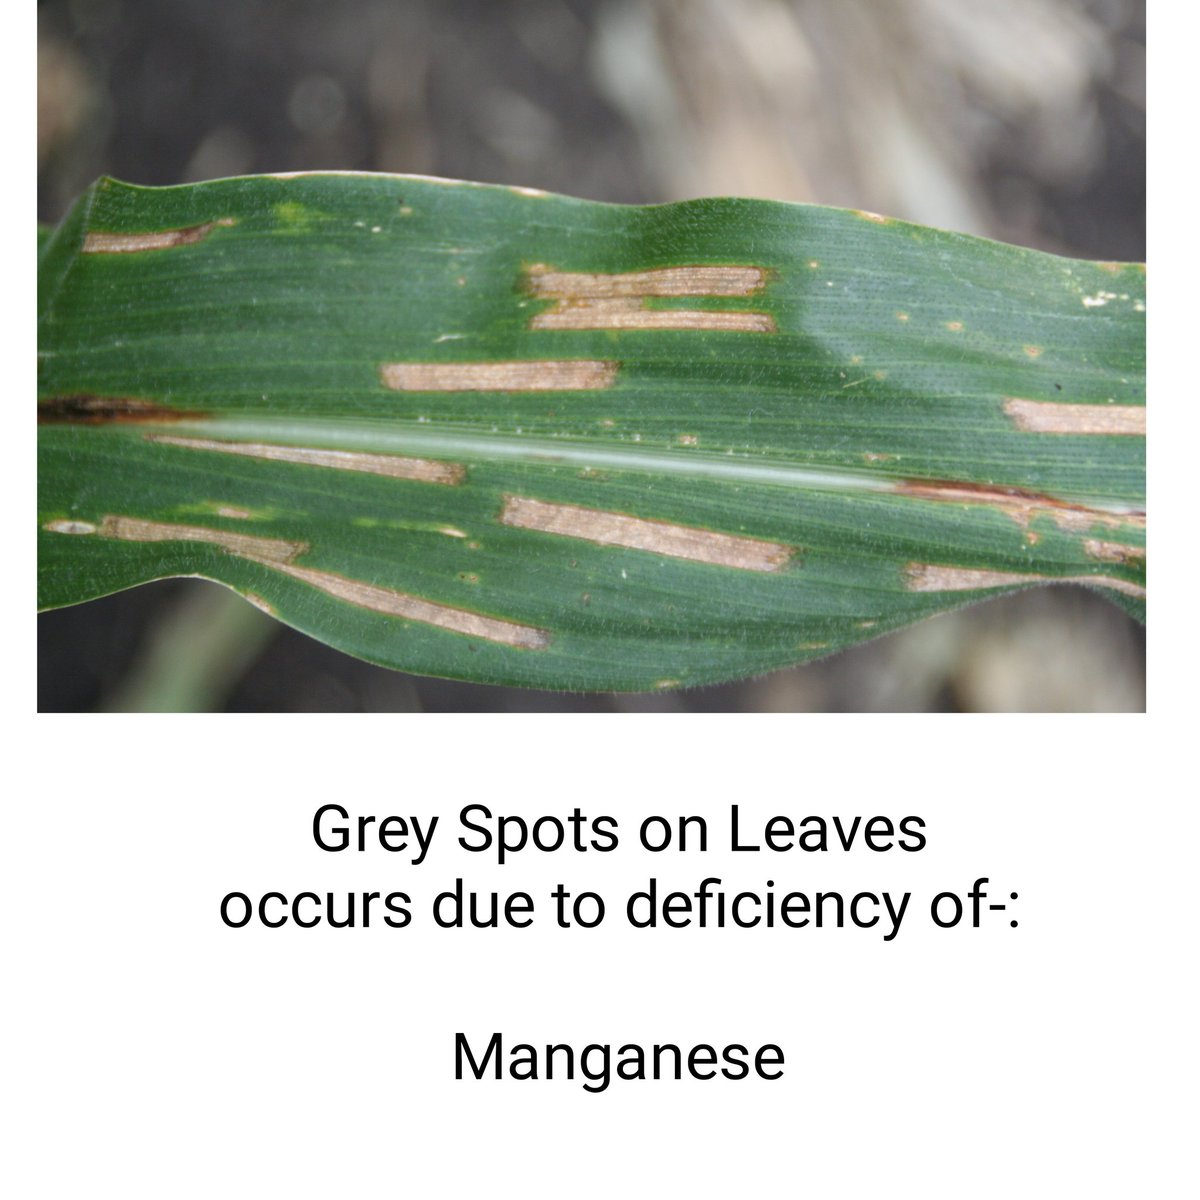 Grey Spot on Leaves is a fungal disease,it occurs due to deficiency of manganese and this is mostly found in Corn.
_
_
#agriculturestudent #agriculturequiz #agribusiness #agroecology #agricultura #agriculturelife #agriculture #agricultural #disease #plantpathology #gk #agrifacts